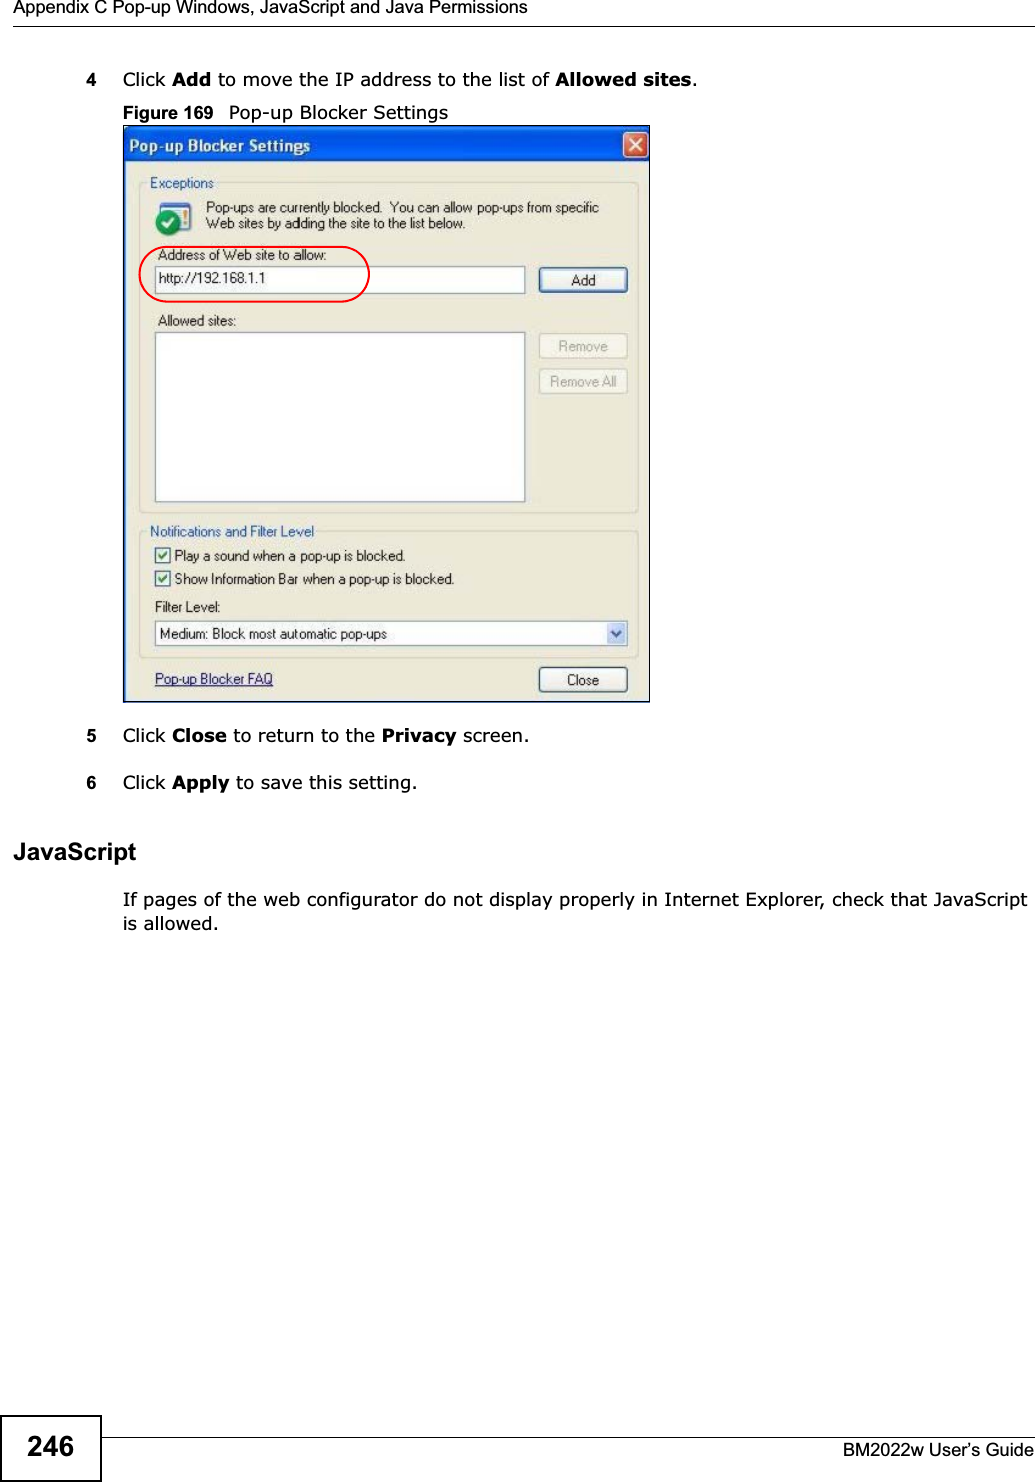 Appendix C Pop-up Windows, JavaScript and Java PermissionsBM2022w User’s Guide2464Click Add to move the IP address to the list of Allowed sites.Figure 169   Pop-up Blocker Settings5Click Close to return to the Privacy screen. 6Click Apply to save this setting. JavaScriptIf pages of the web configurator do not display properly in Internet Explorer, check that JavaScript is allowed. 